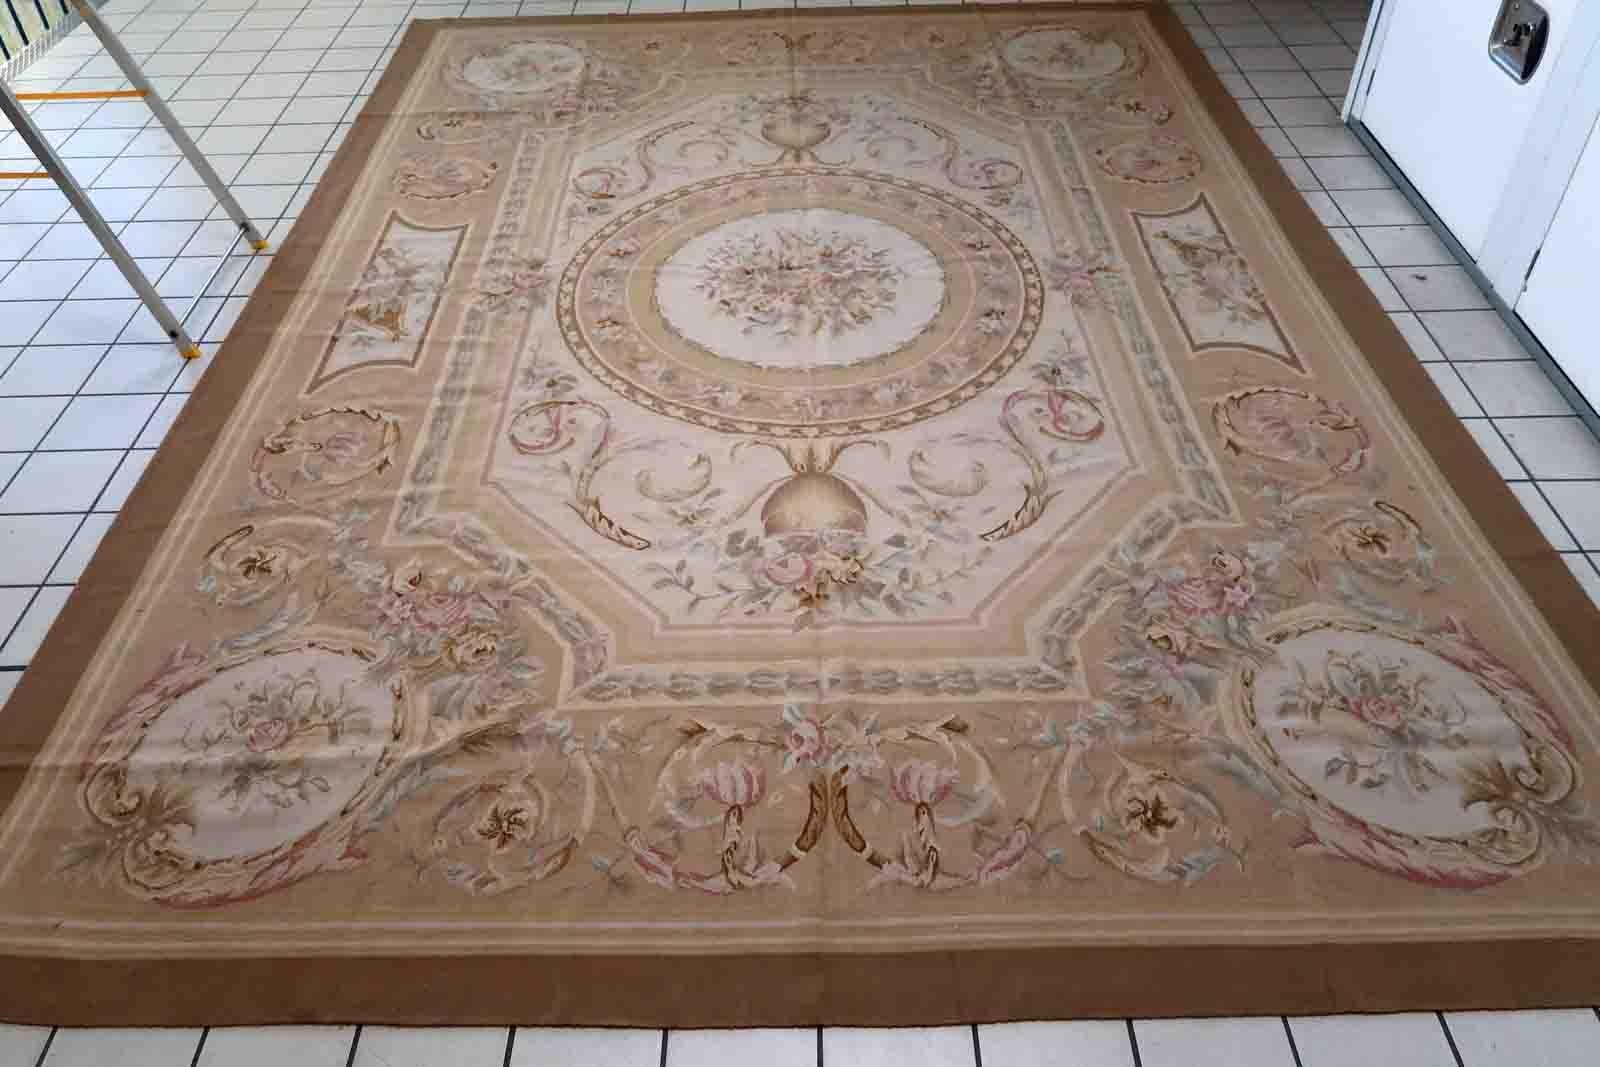 Handmade vintage French Aubusson rug in original good condition. This rug is one of a kind made in France in the end of 20th century.

-condition: original good,

-circa: 1970s,

-size: 8.7' x 12' (266cm x 367cm),

-material: